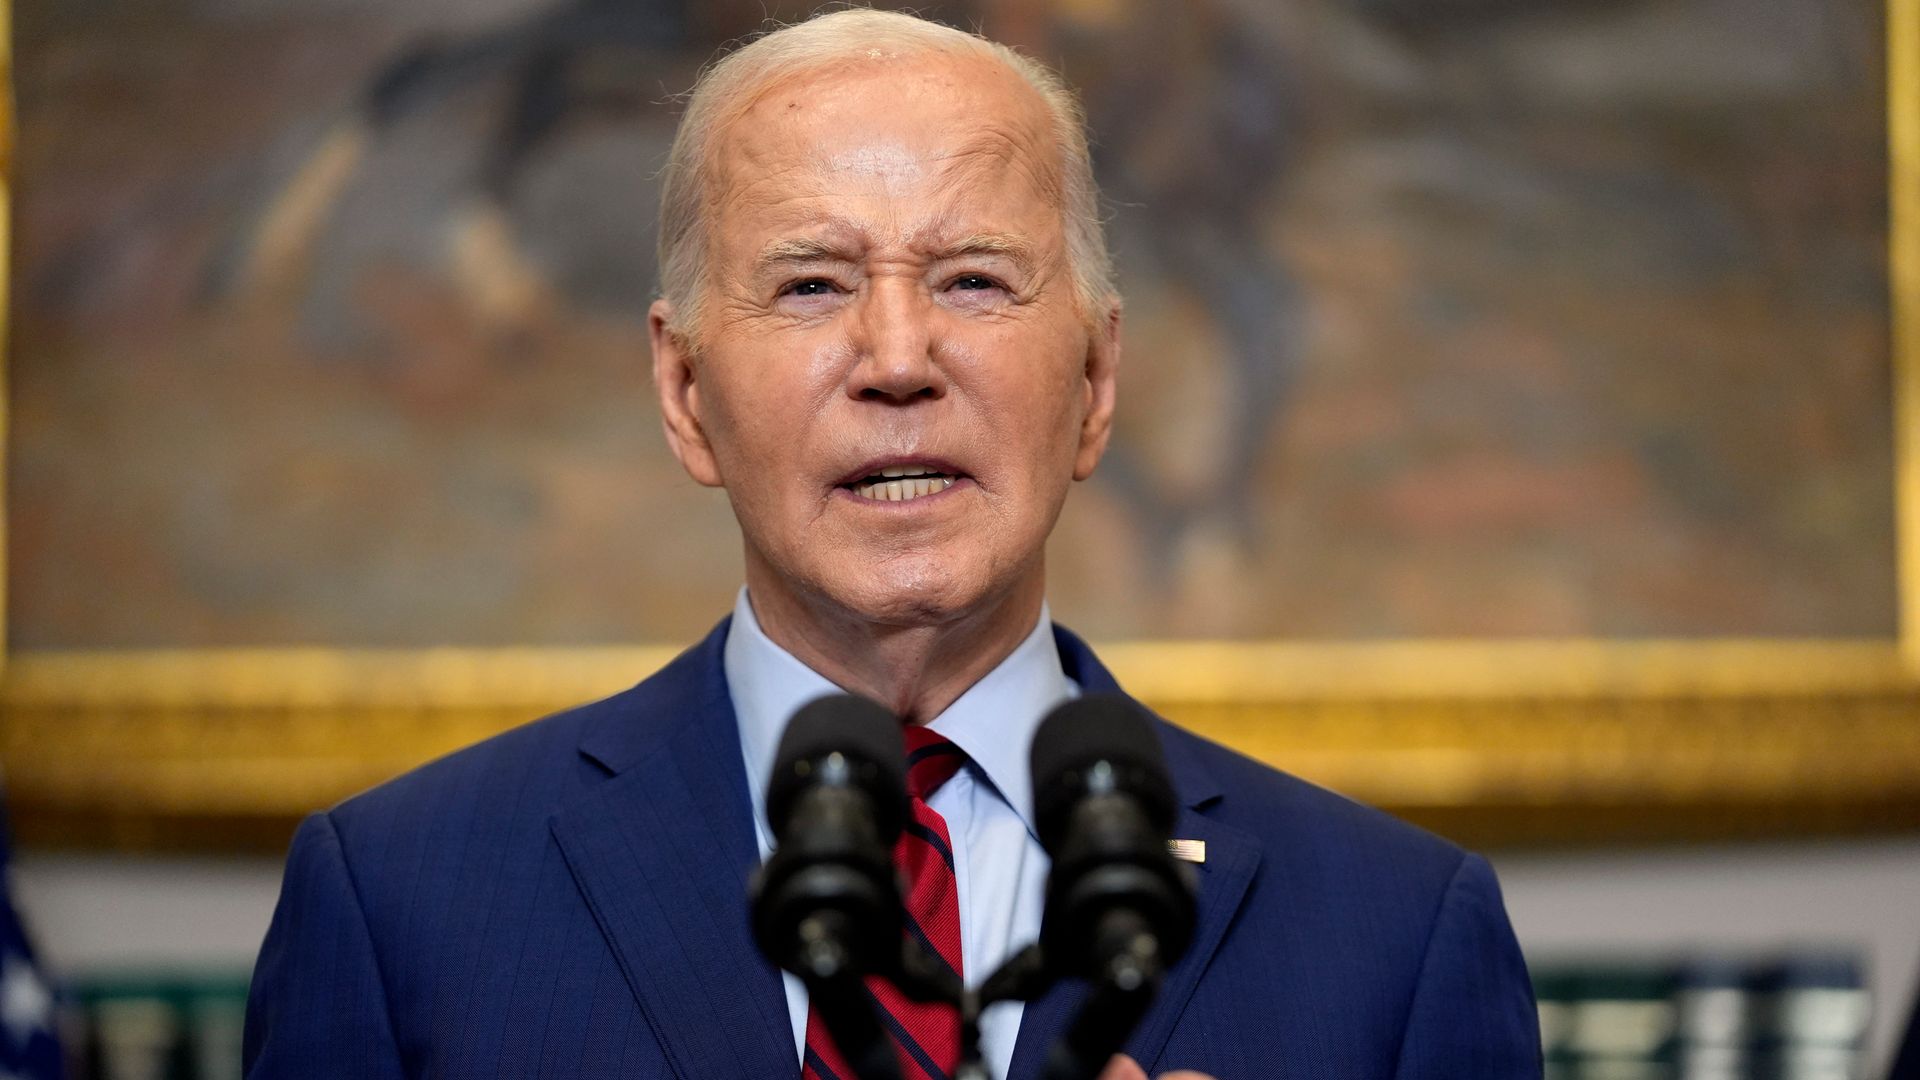 Biden speaks out for first time over US university protests